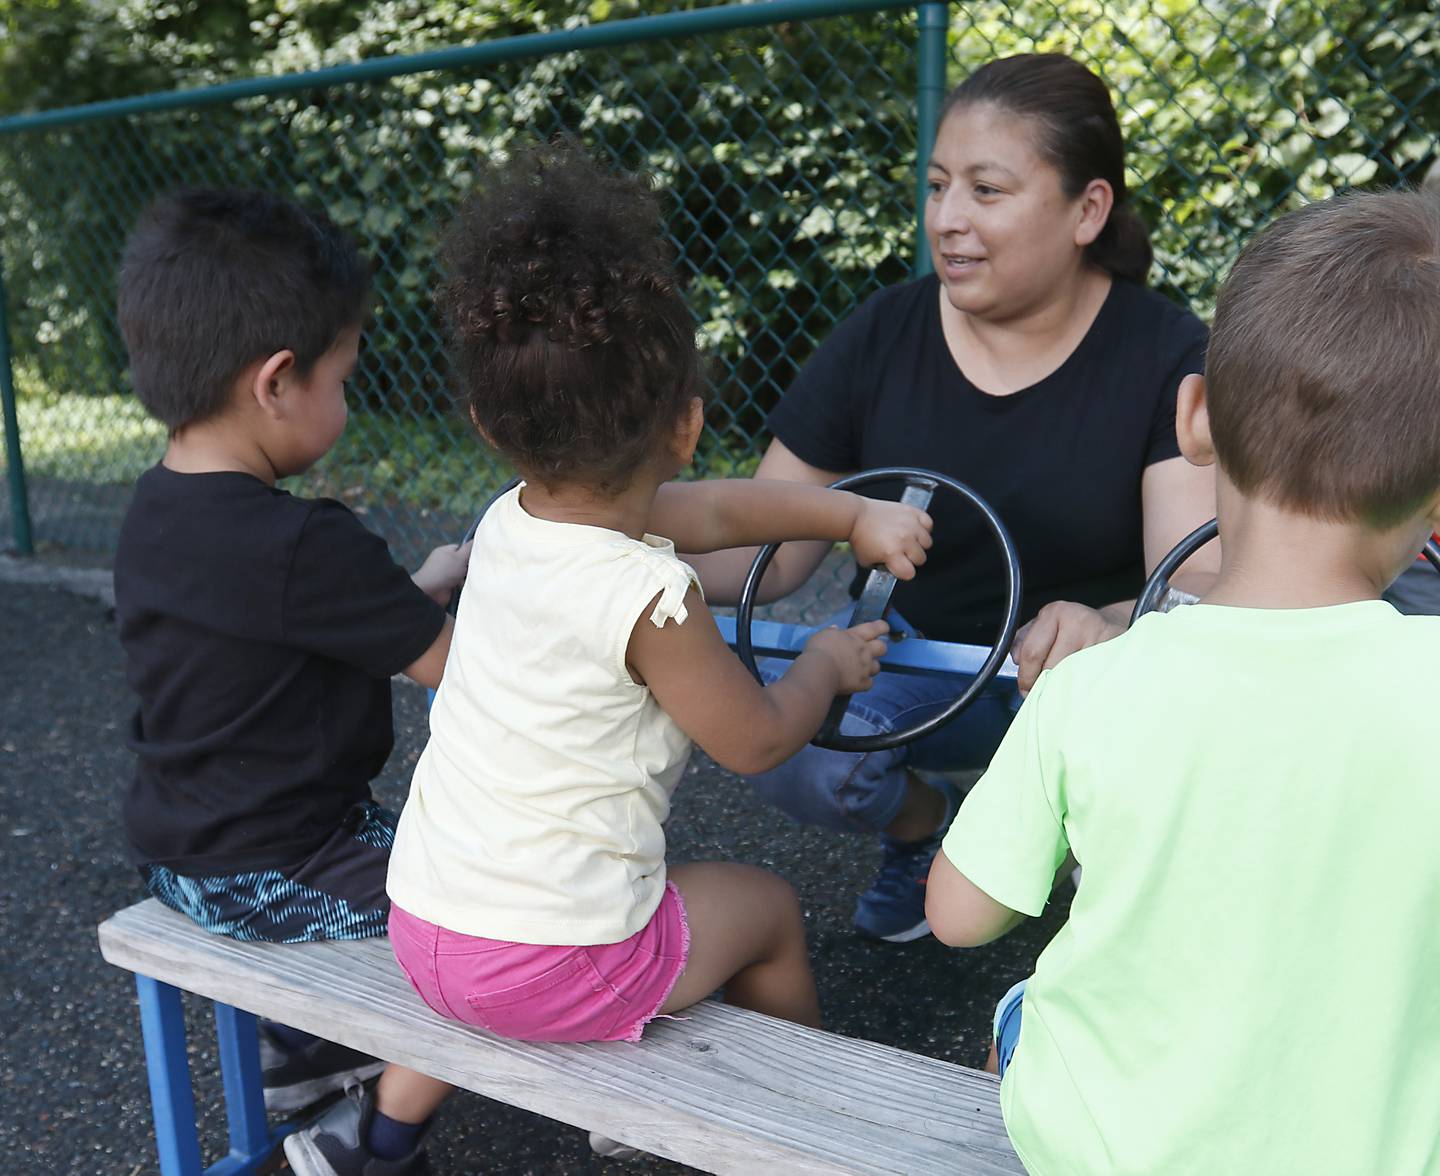 Teacher Nunez Arias interacts with a with children as they play on the playground Thursday, July 28, 2022, at the Friendship House, 100 South Main Street, in Crystal Lake. Childcare centers are struggling to find enough teachers to maintain operations.